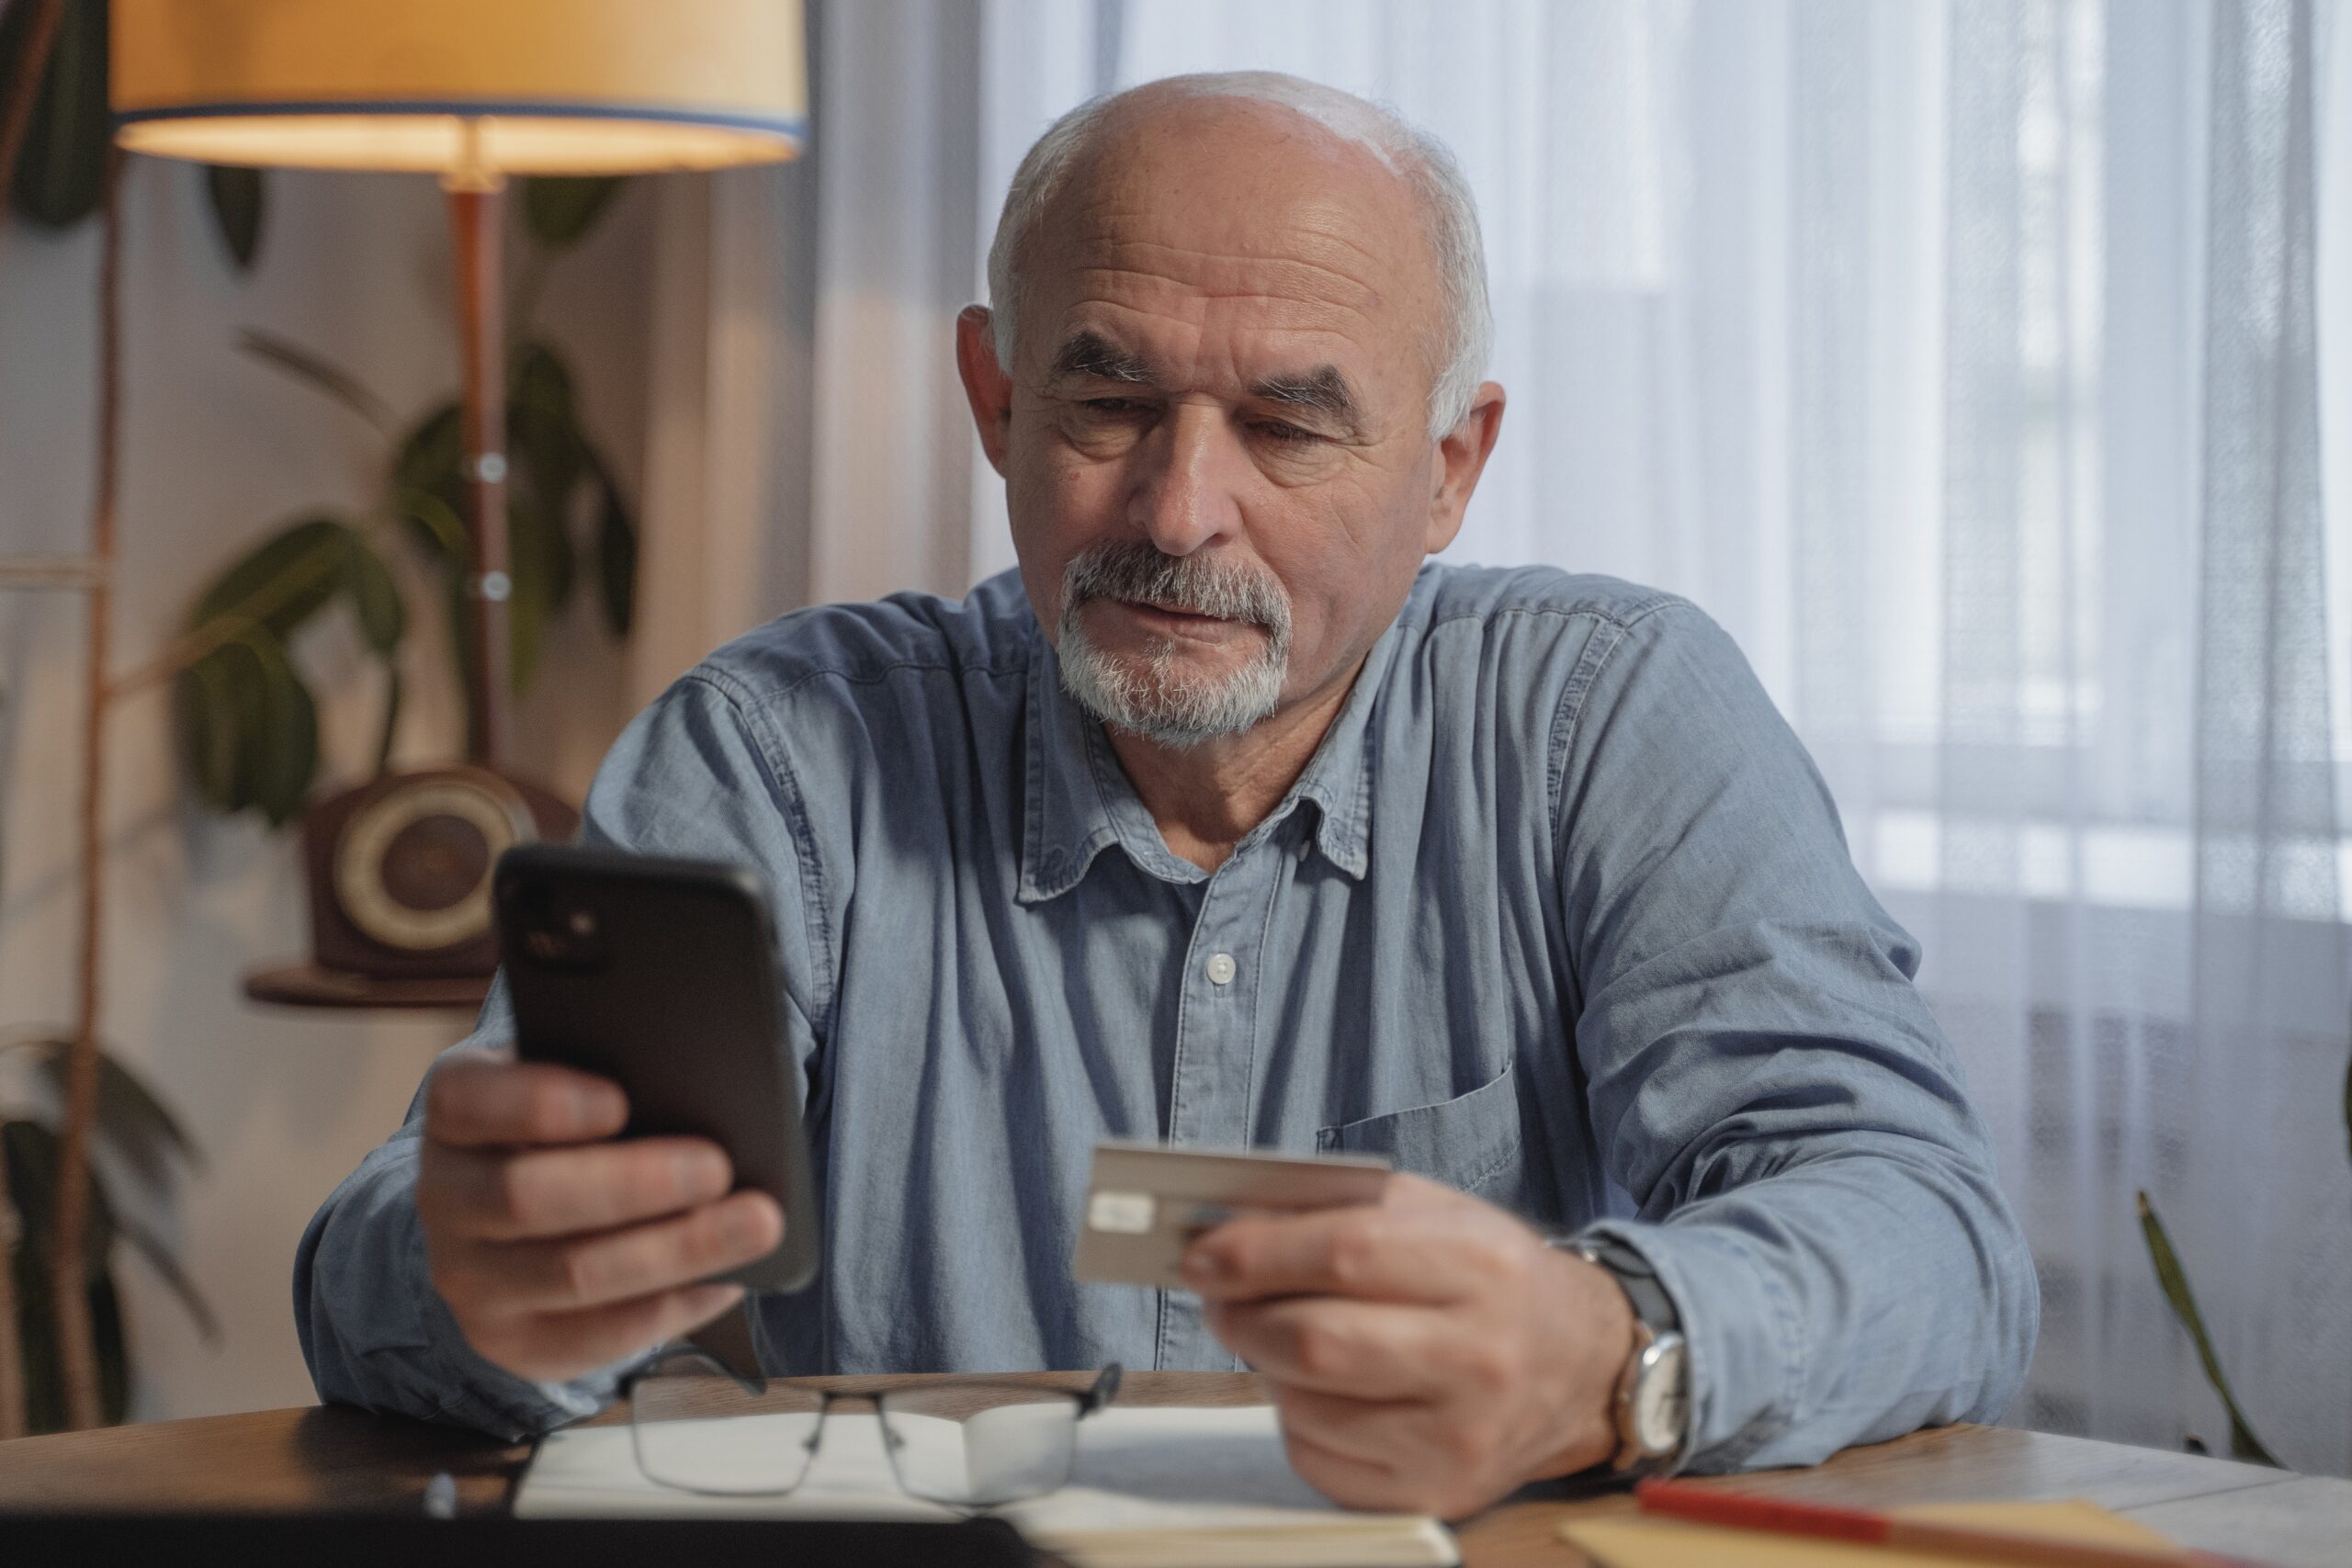 old man using a phone and credit card to shop online